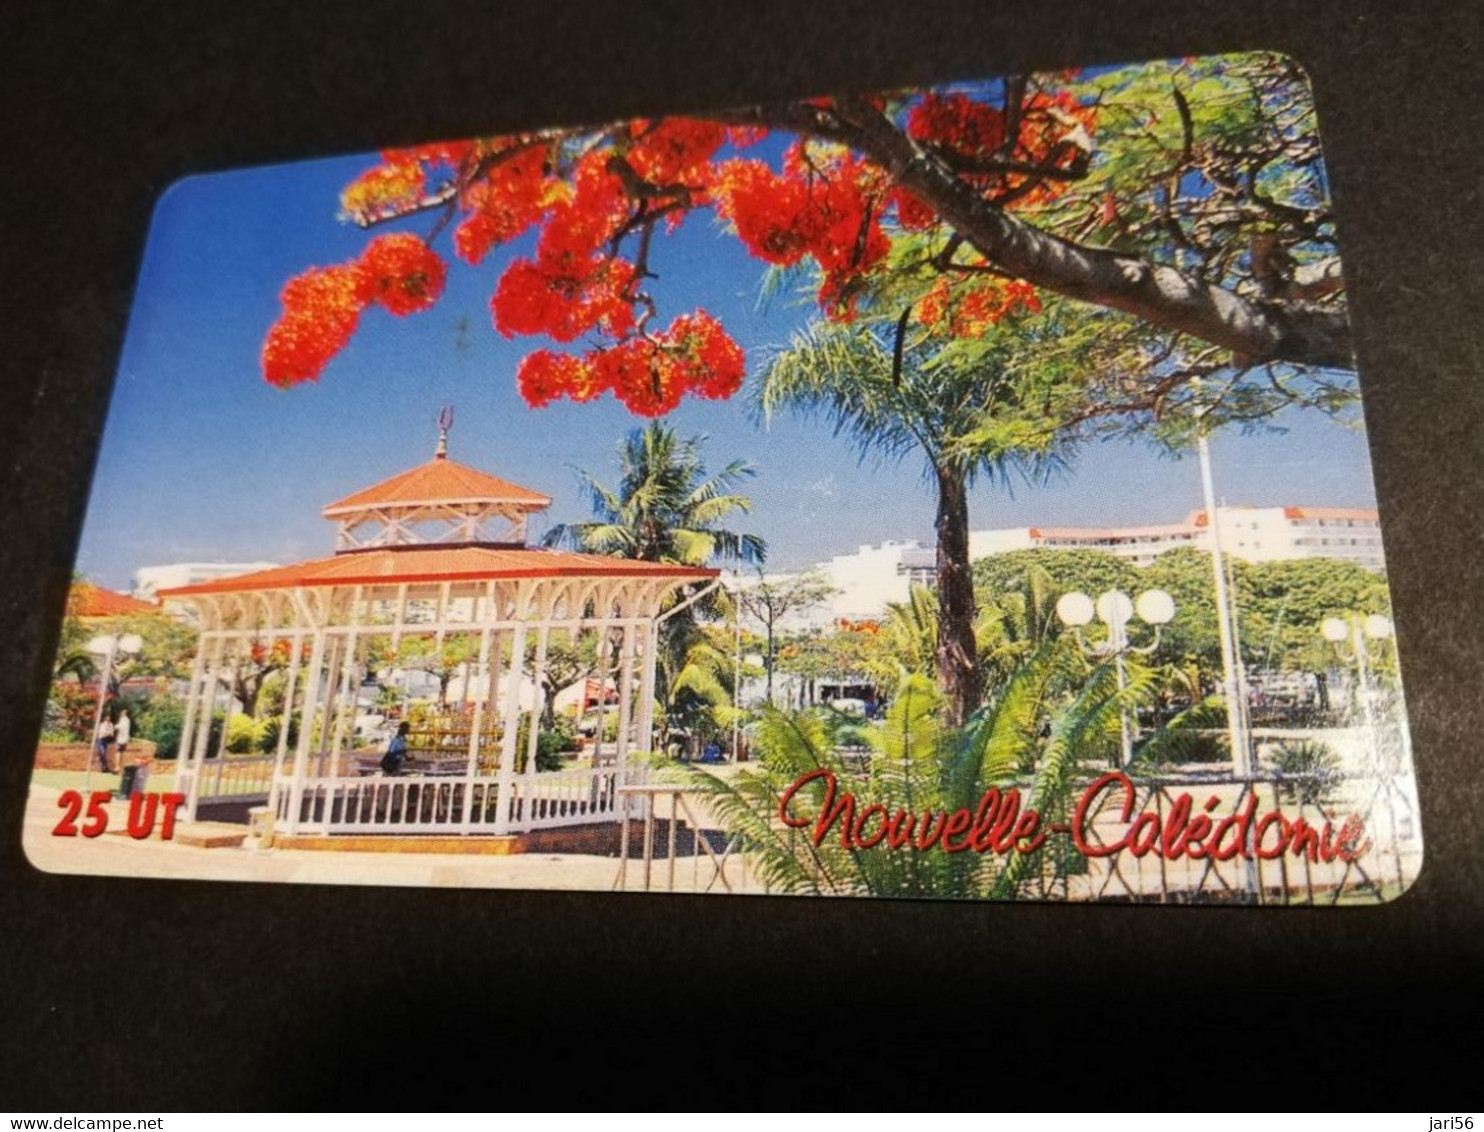 NOUVELLE CALEDONIA  CHIP CARD 25  UNITS  KIOSQUE A MUSIC AND FLOWERS IN TREE       ** 4195 ** - Nuova Caledonia